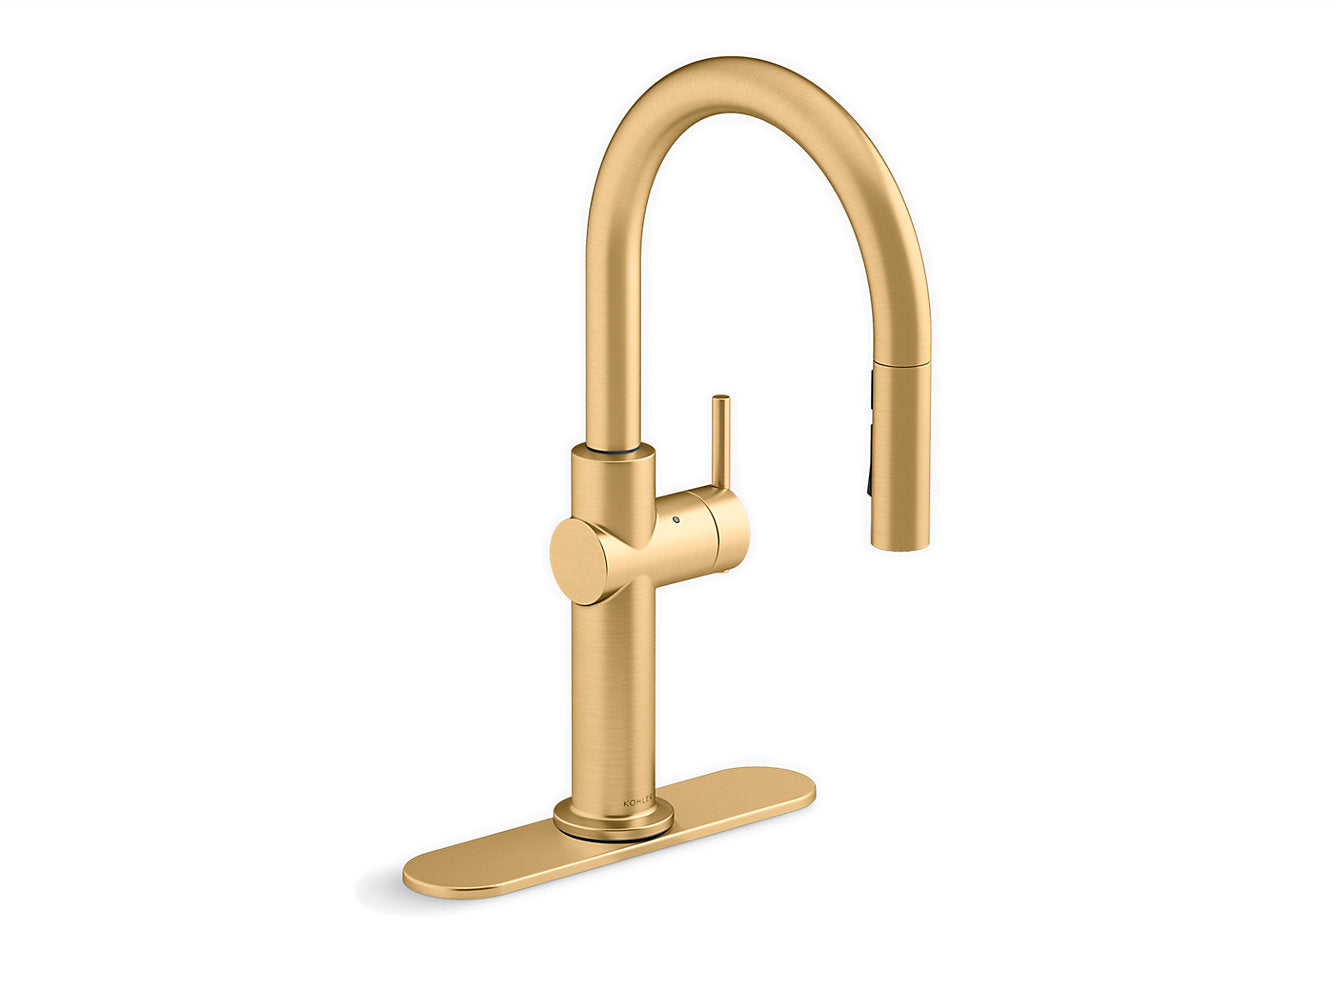 Kohler Crue 17" Contemporary Kitchen Faucet With Kohler Konnect and Voice Activated Technology- Vibrant Brushed Brass